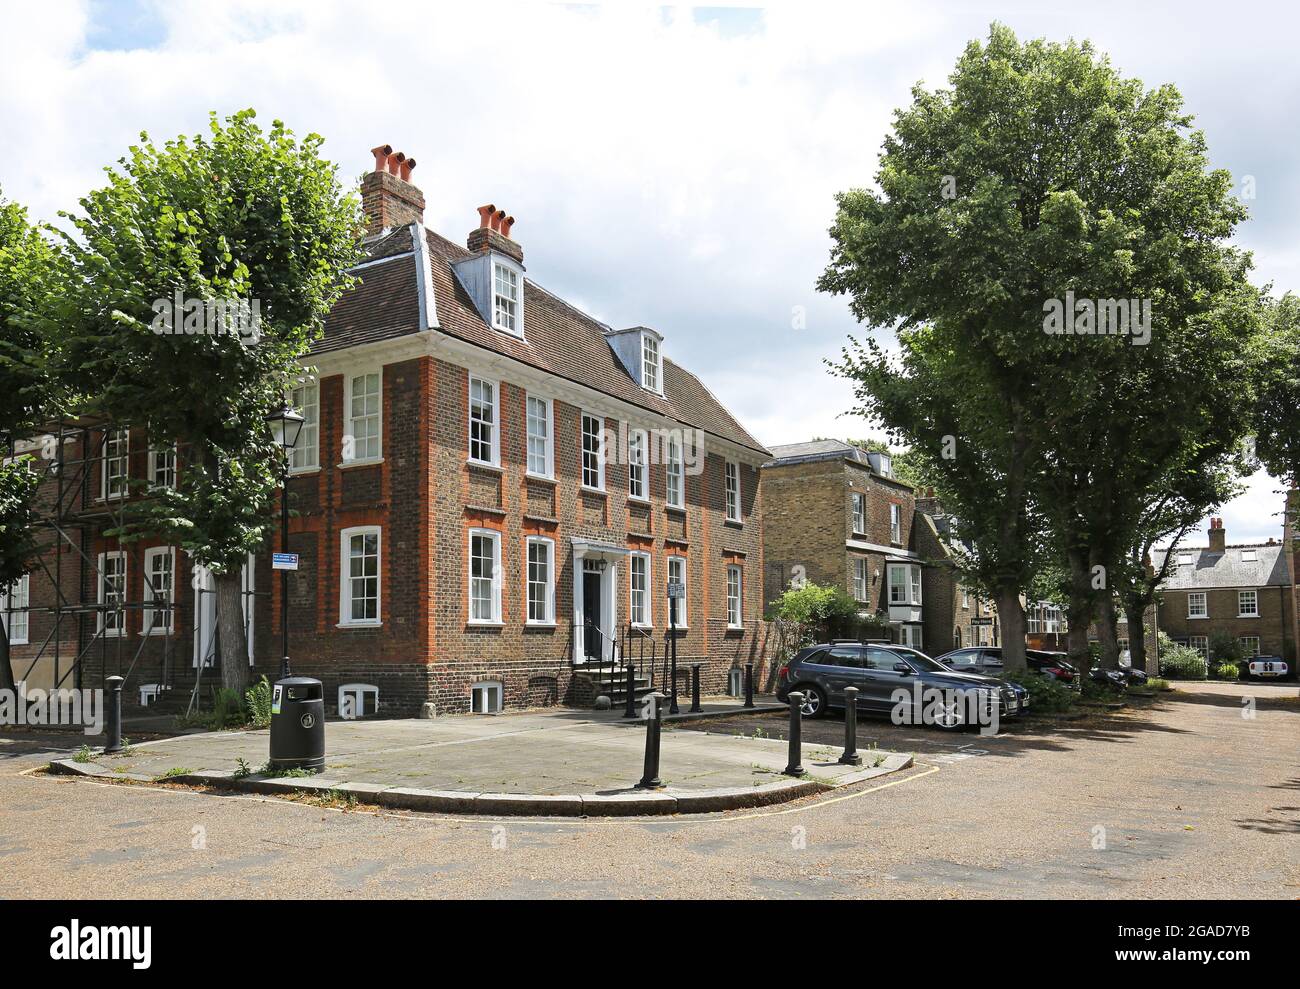 The Butts Estate, Brentford, West London, UK. An area of elegant, Grade II listed, 18th Century houses. Stock Photo